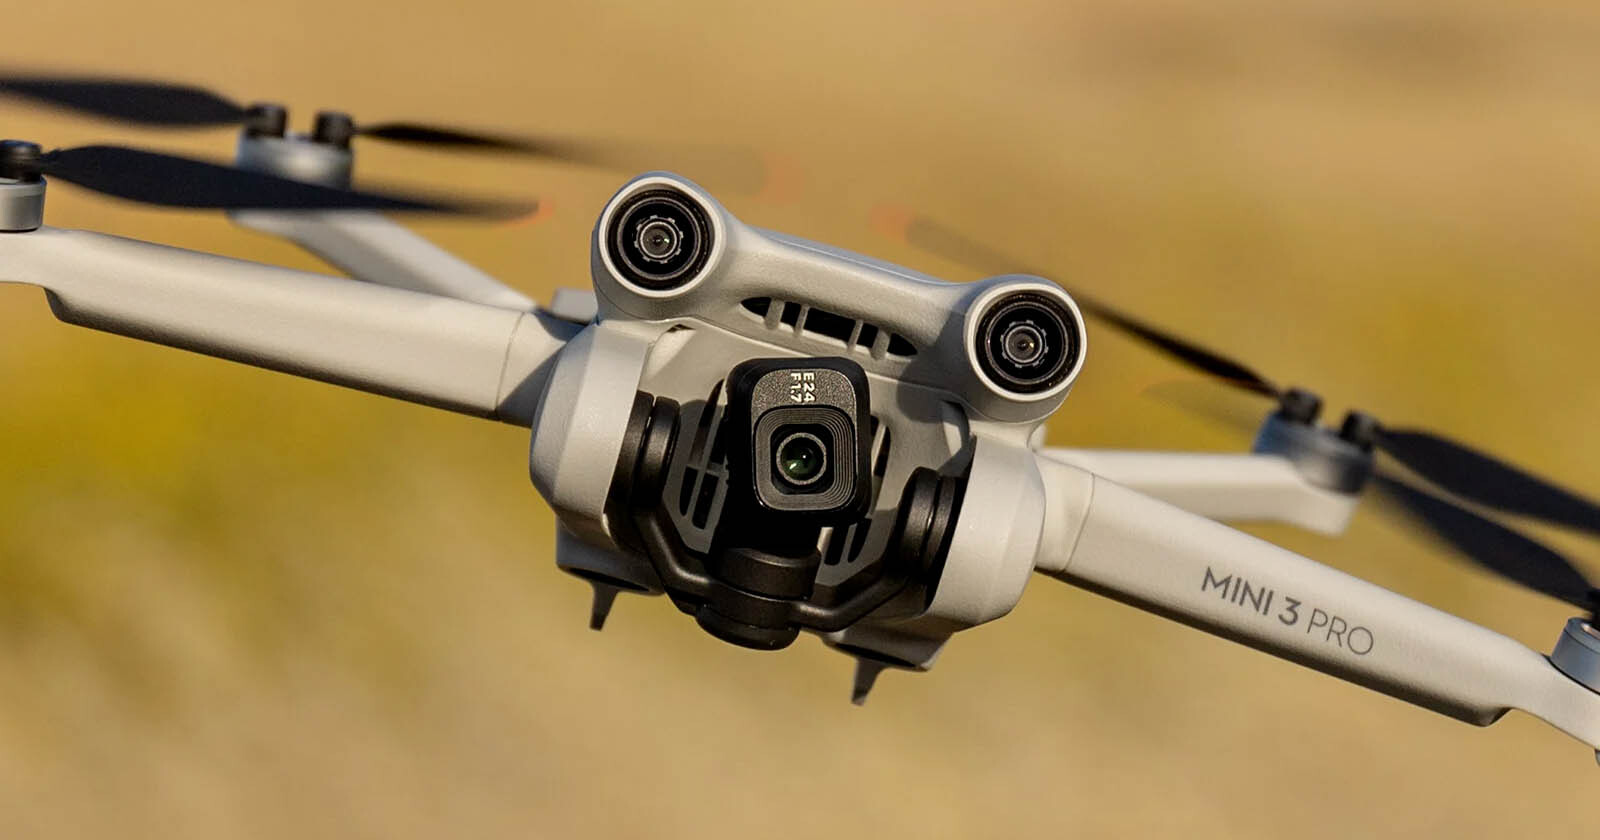 Floridas Government Ban on Chinese-Made Drones Goes into Effect